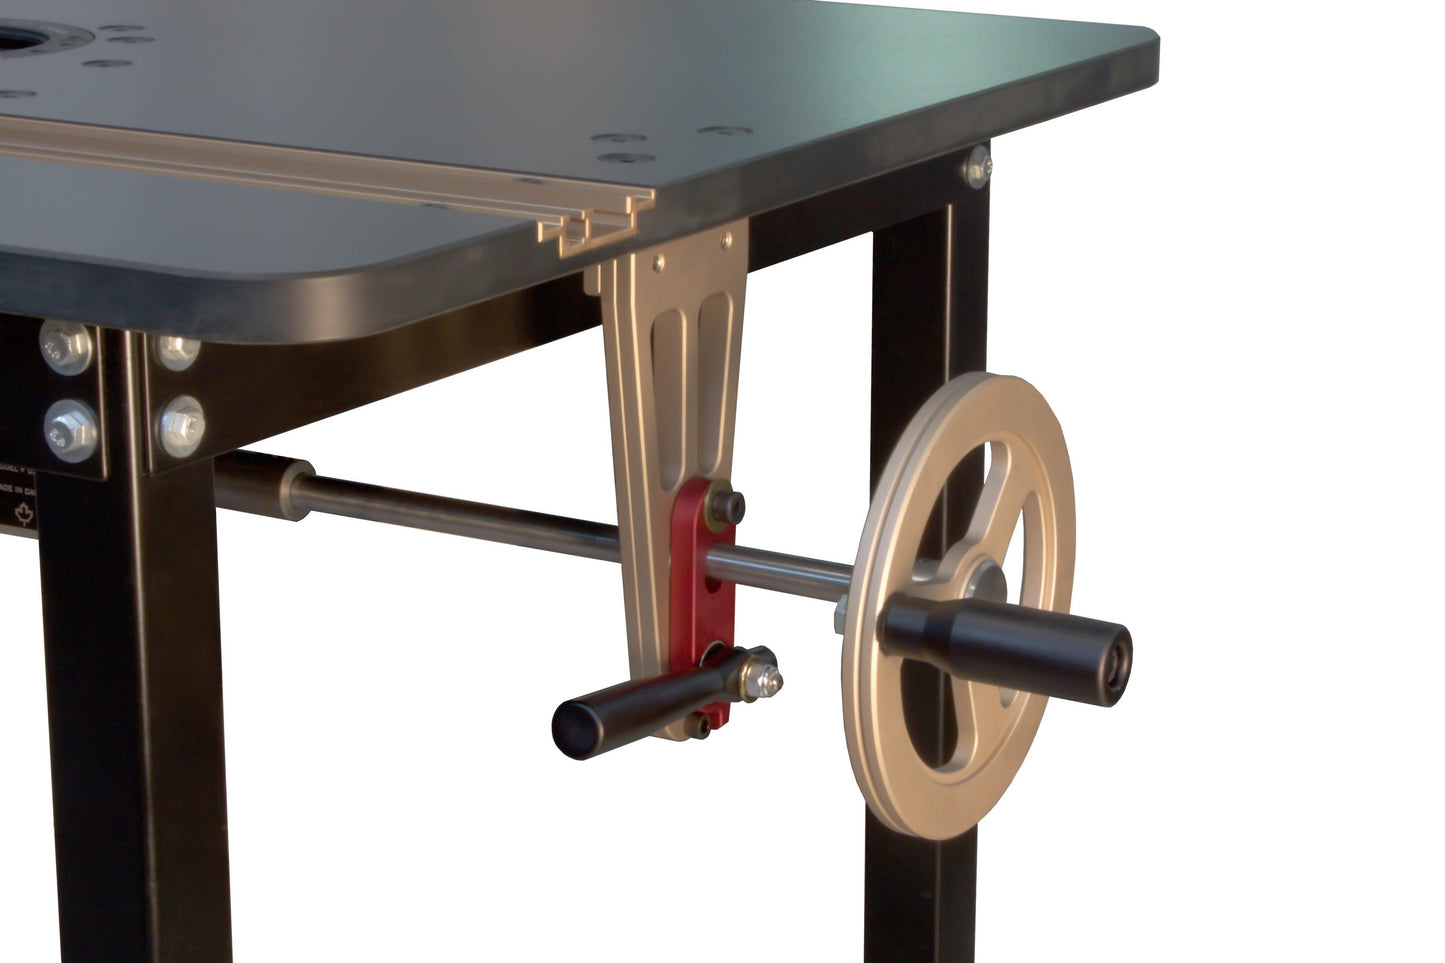 Mast-R-Lift Excel II Table Package